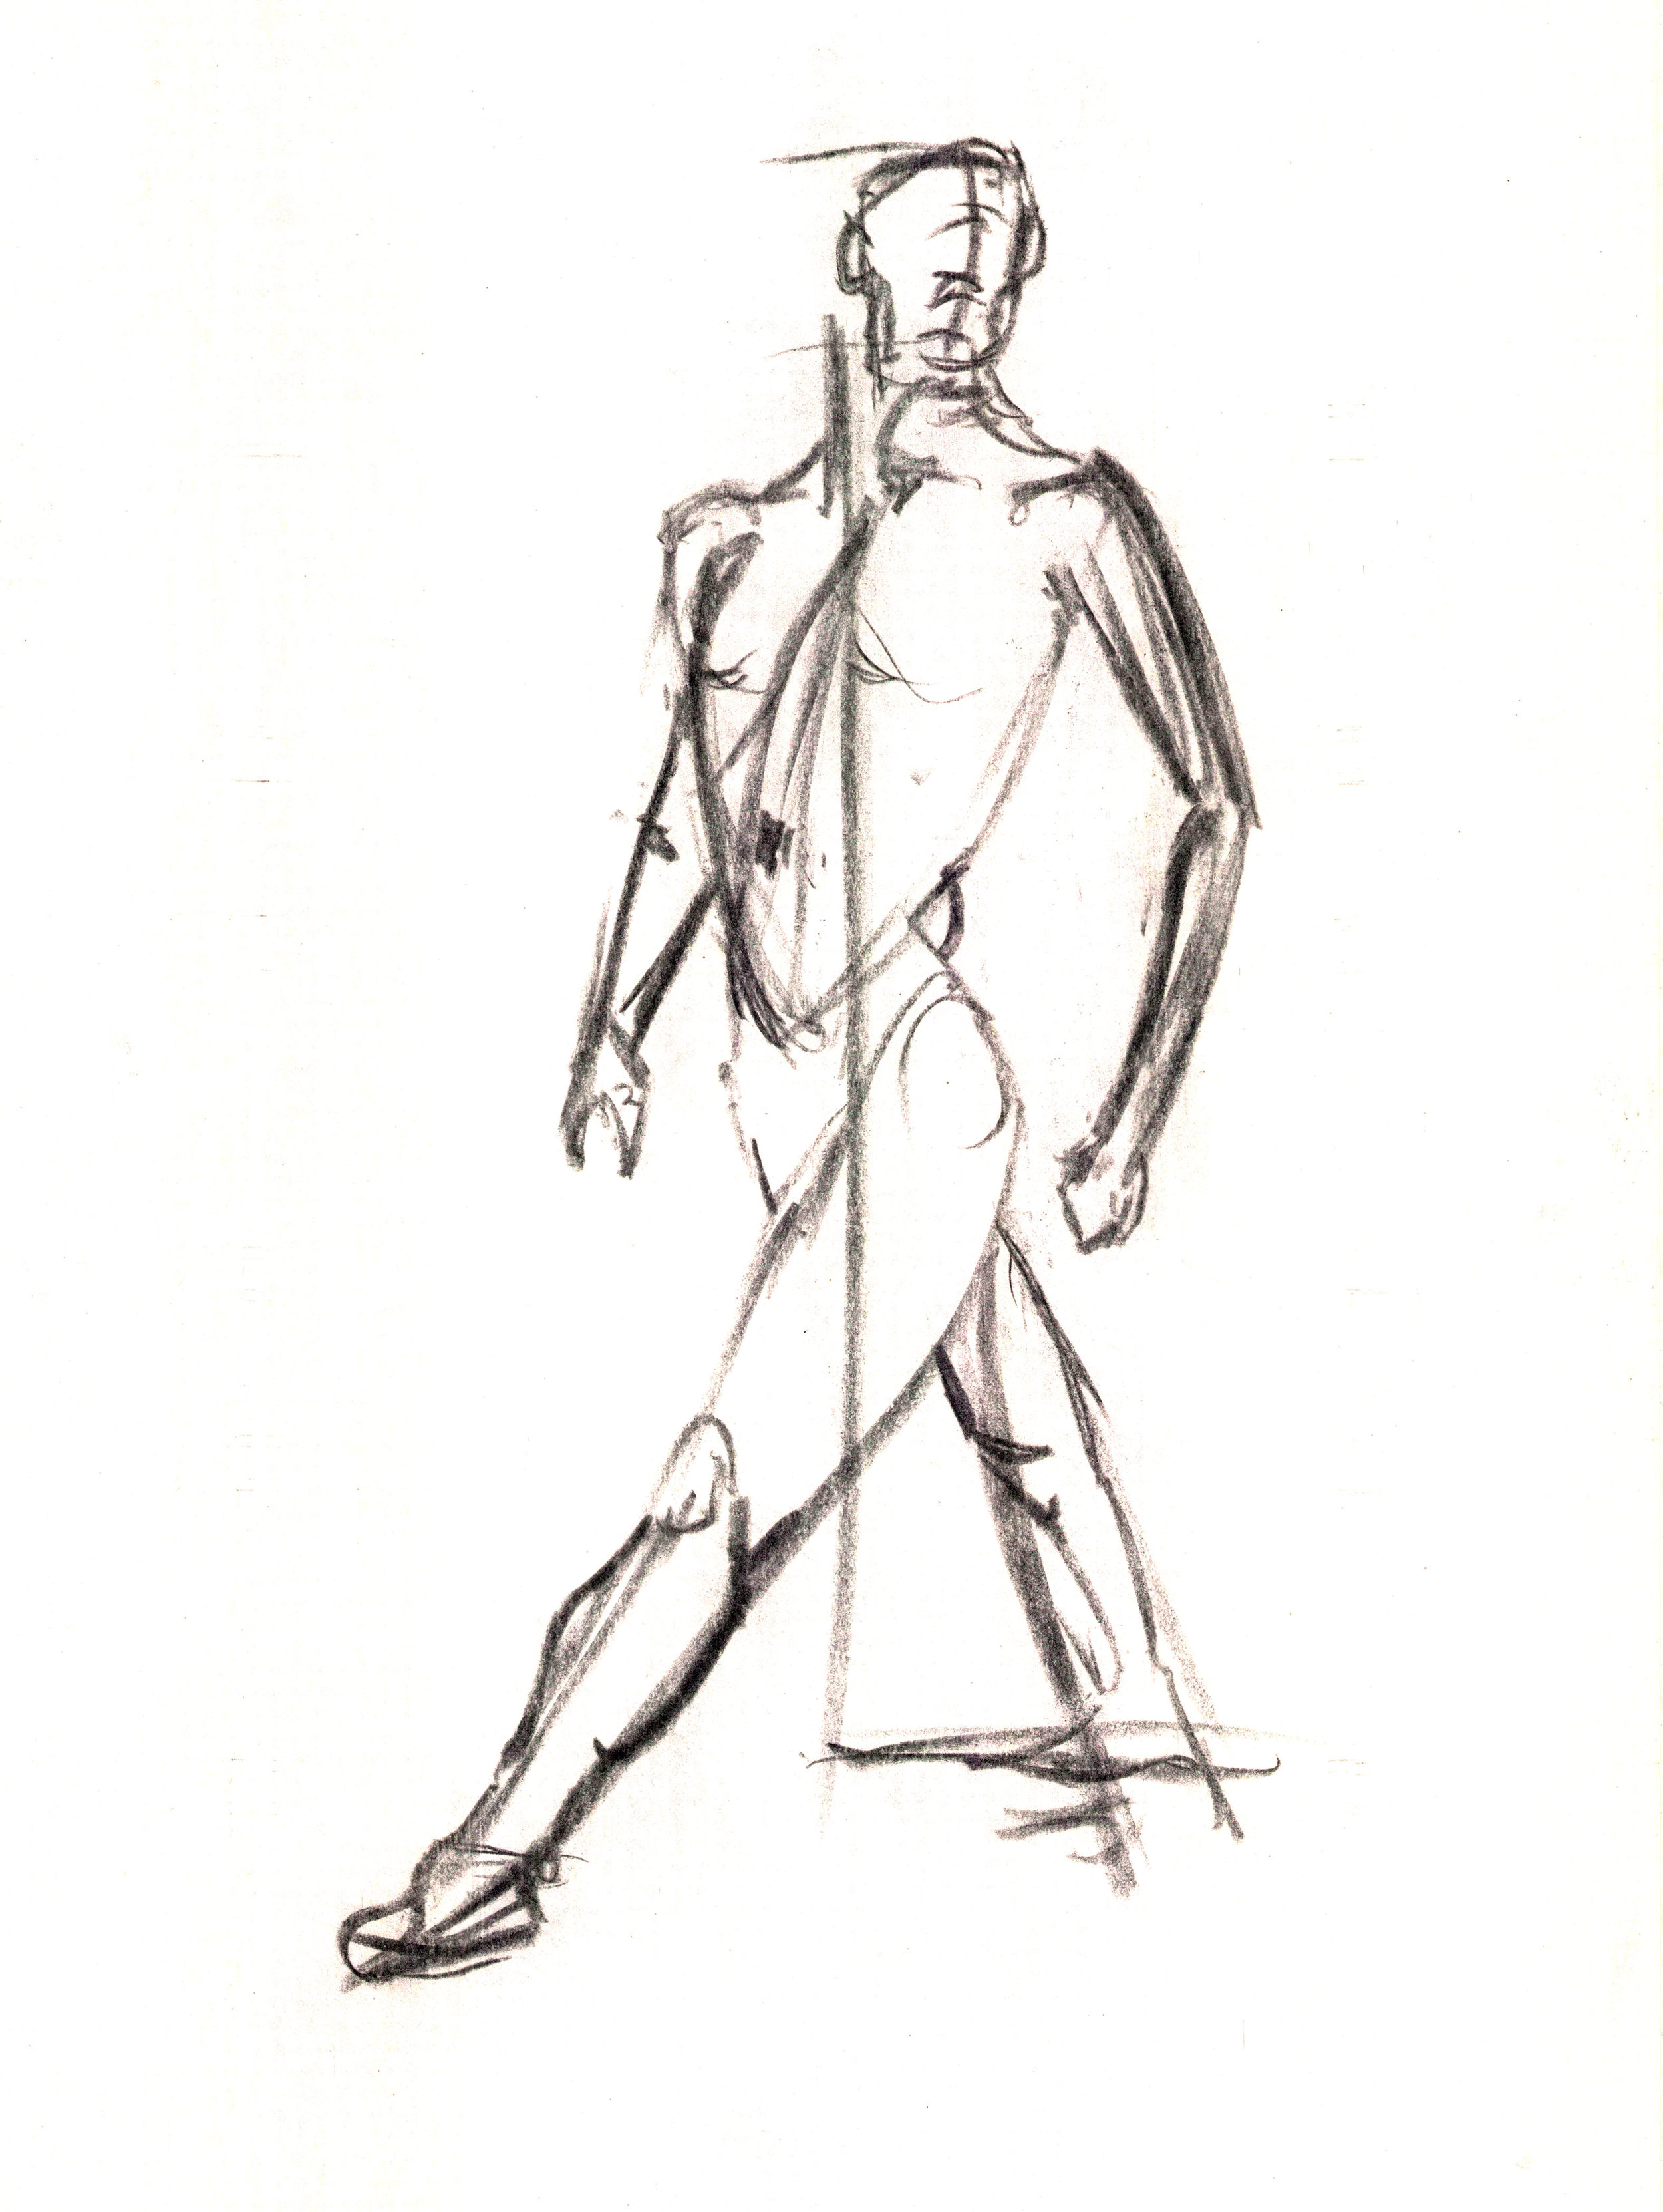 2 min Gesture/Life Drawing - Charcoal - 2014